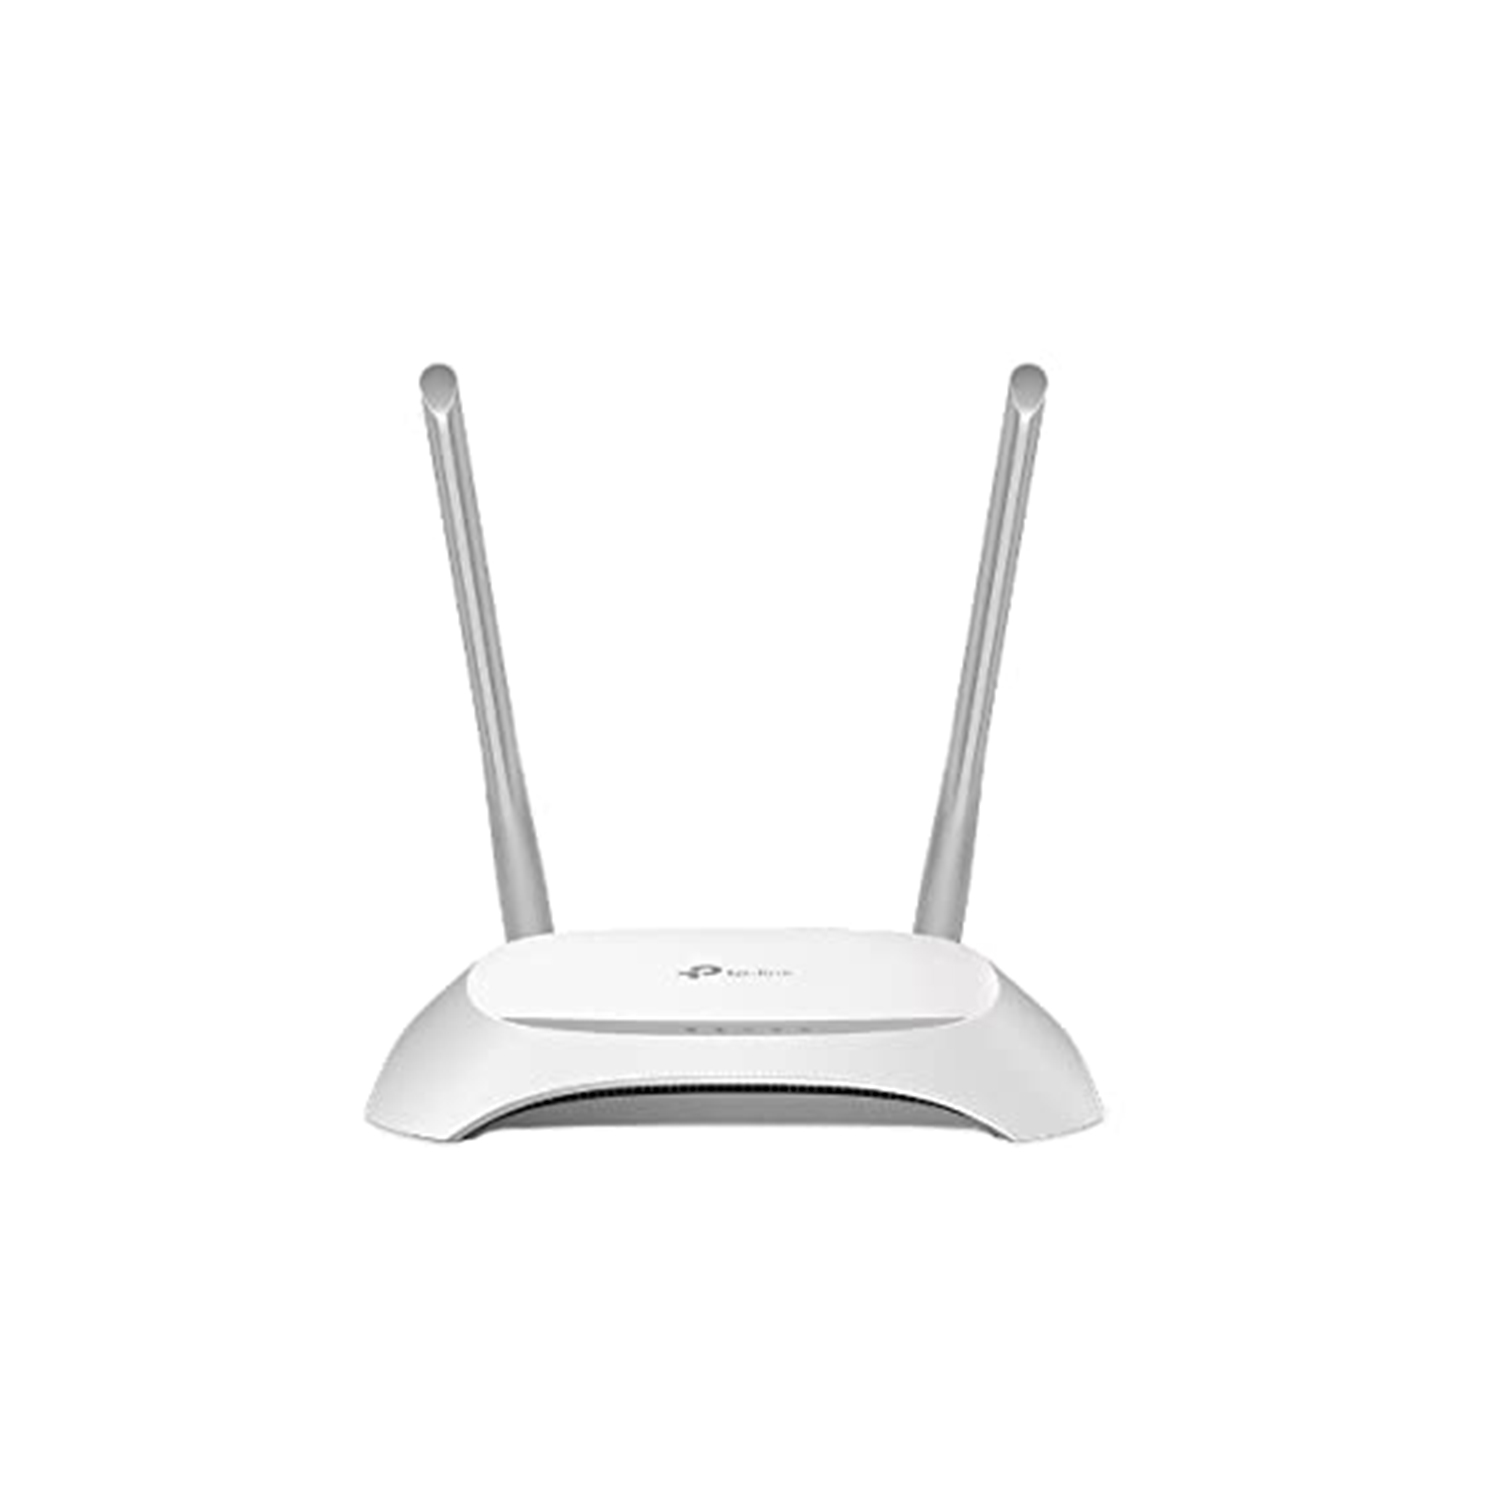 TP-Link Cable Connector TL-WR850N 300Mbps Wi-Fi Wireless N Speed Router White, Single Band TL Wireless with Modem 300 Mbps Speed Frequency: 2.4 GHz External Antenna